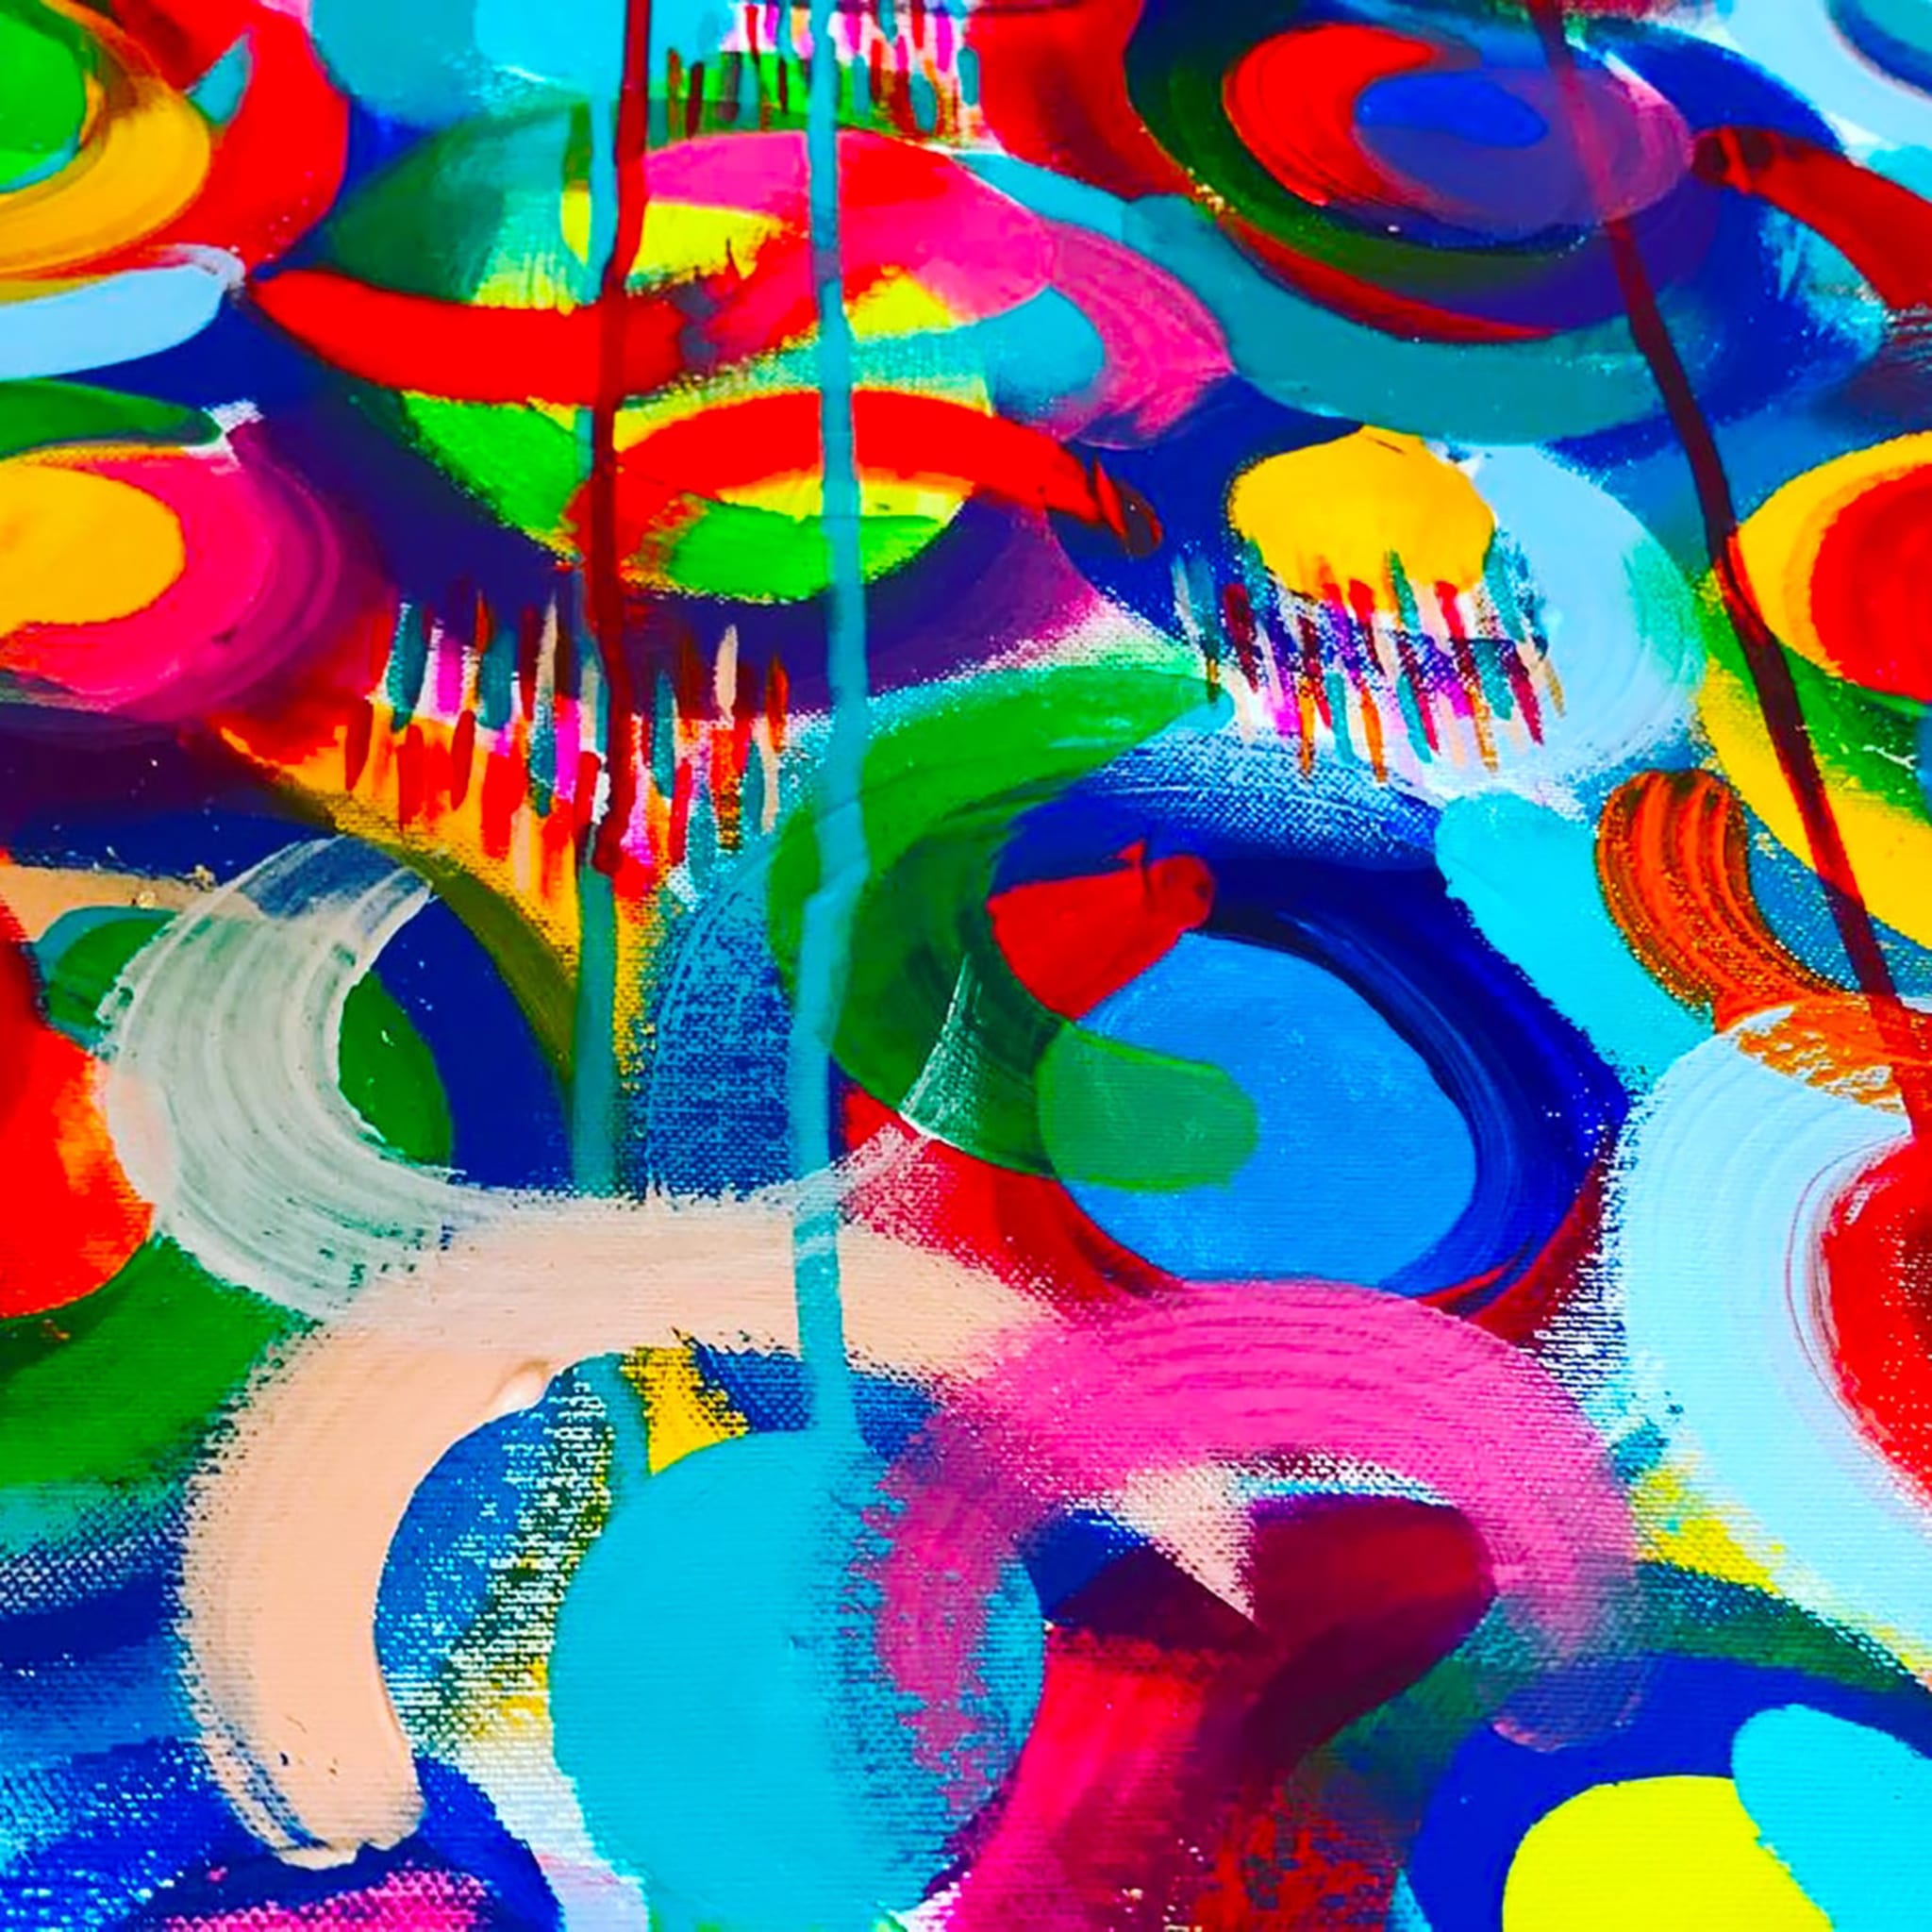 Dance of Colors Acrylic Small Painting - Alternative view 1